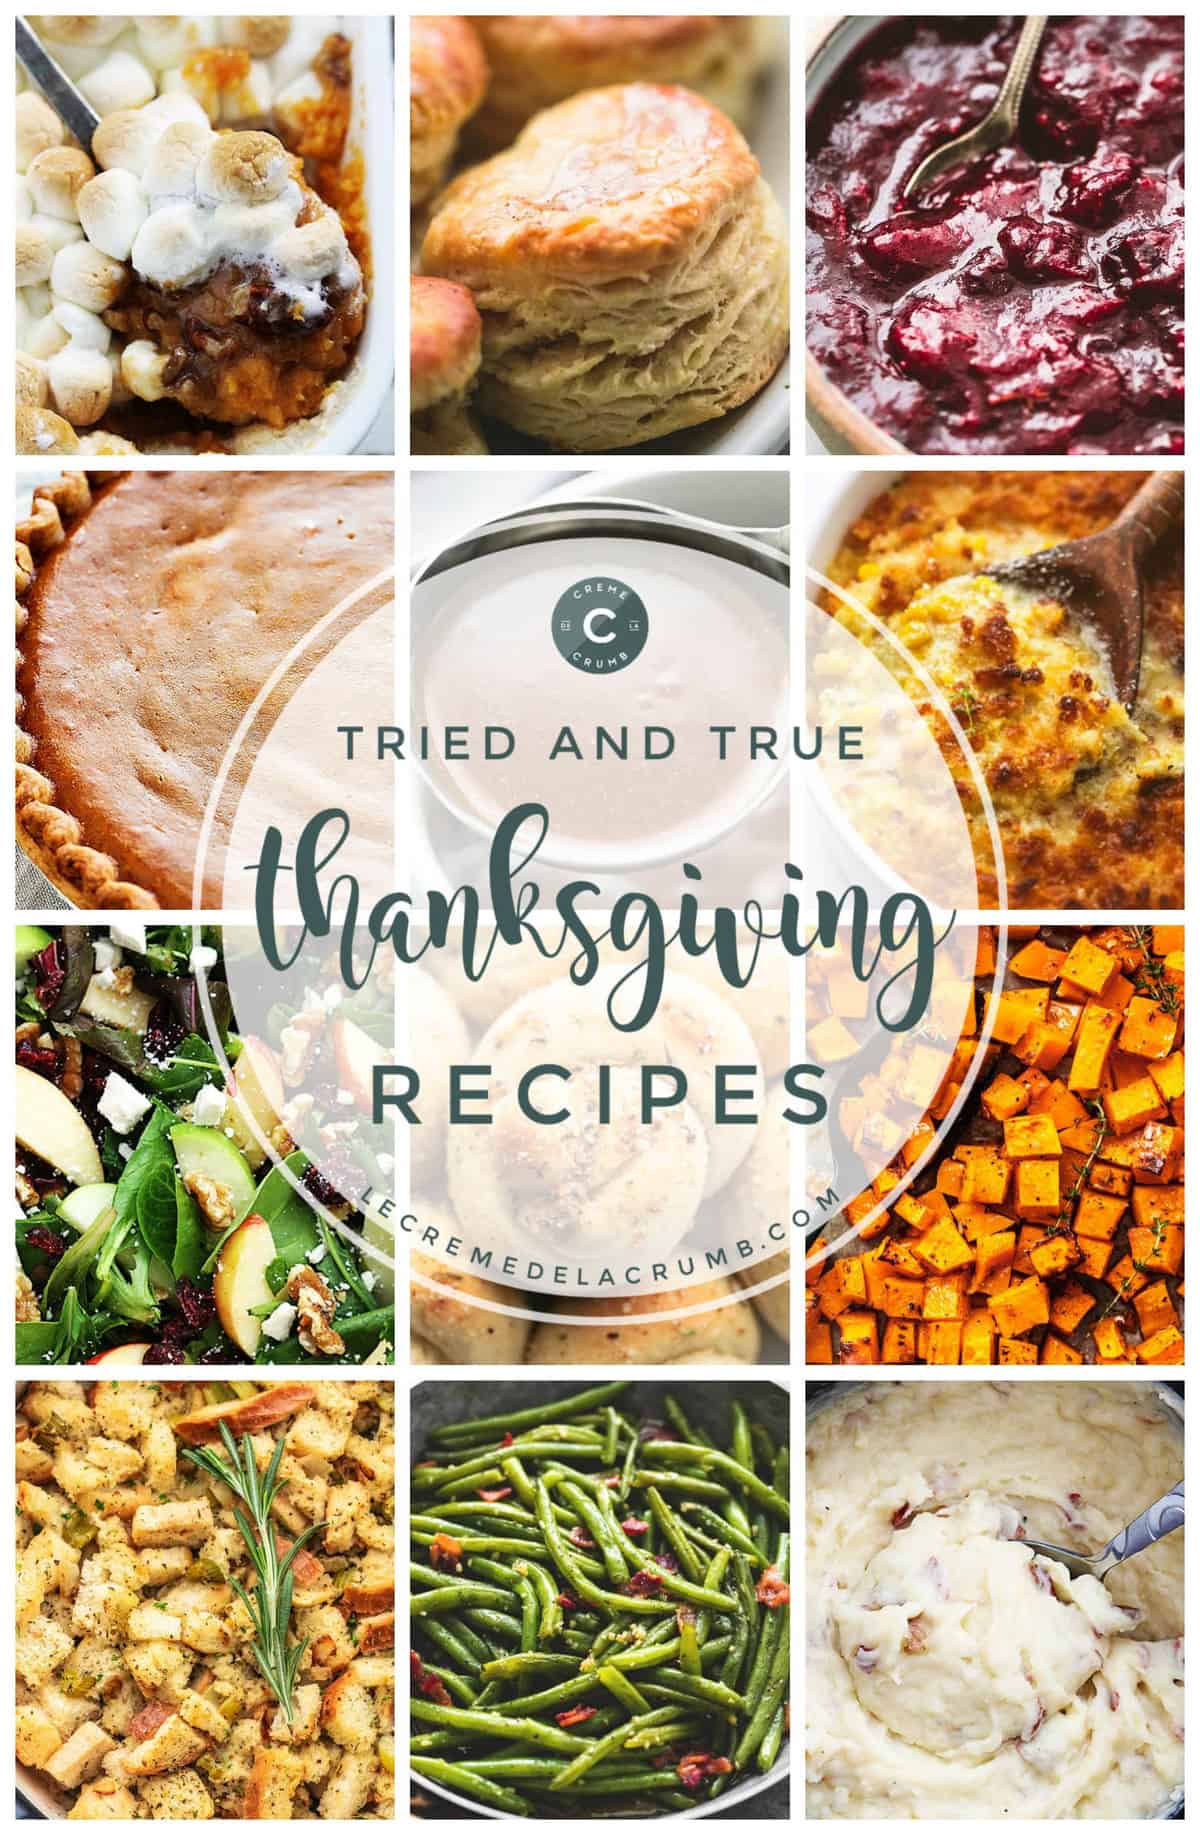 image of the cover of "Tried and True Thanksgiving Recipes" cookbook.